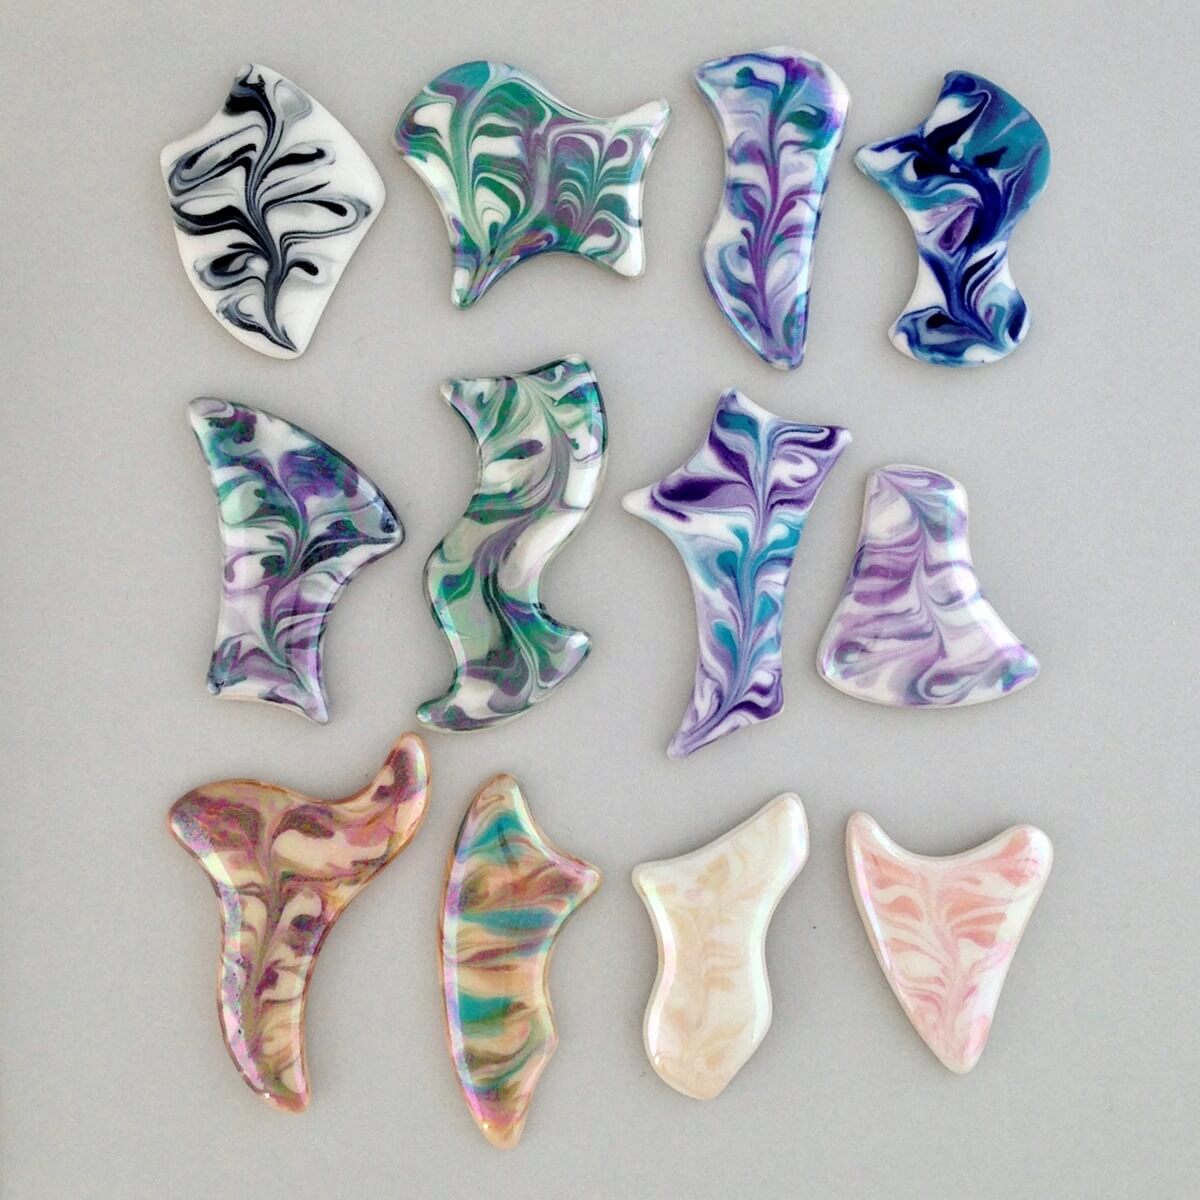 Abstract porcelain cabochons for your wire or beaded designs.